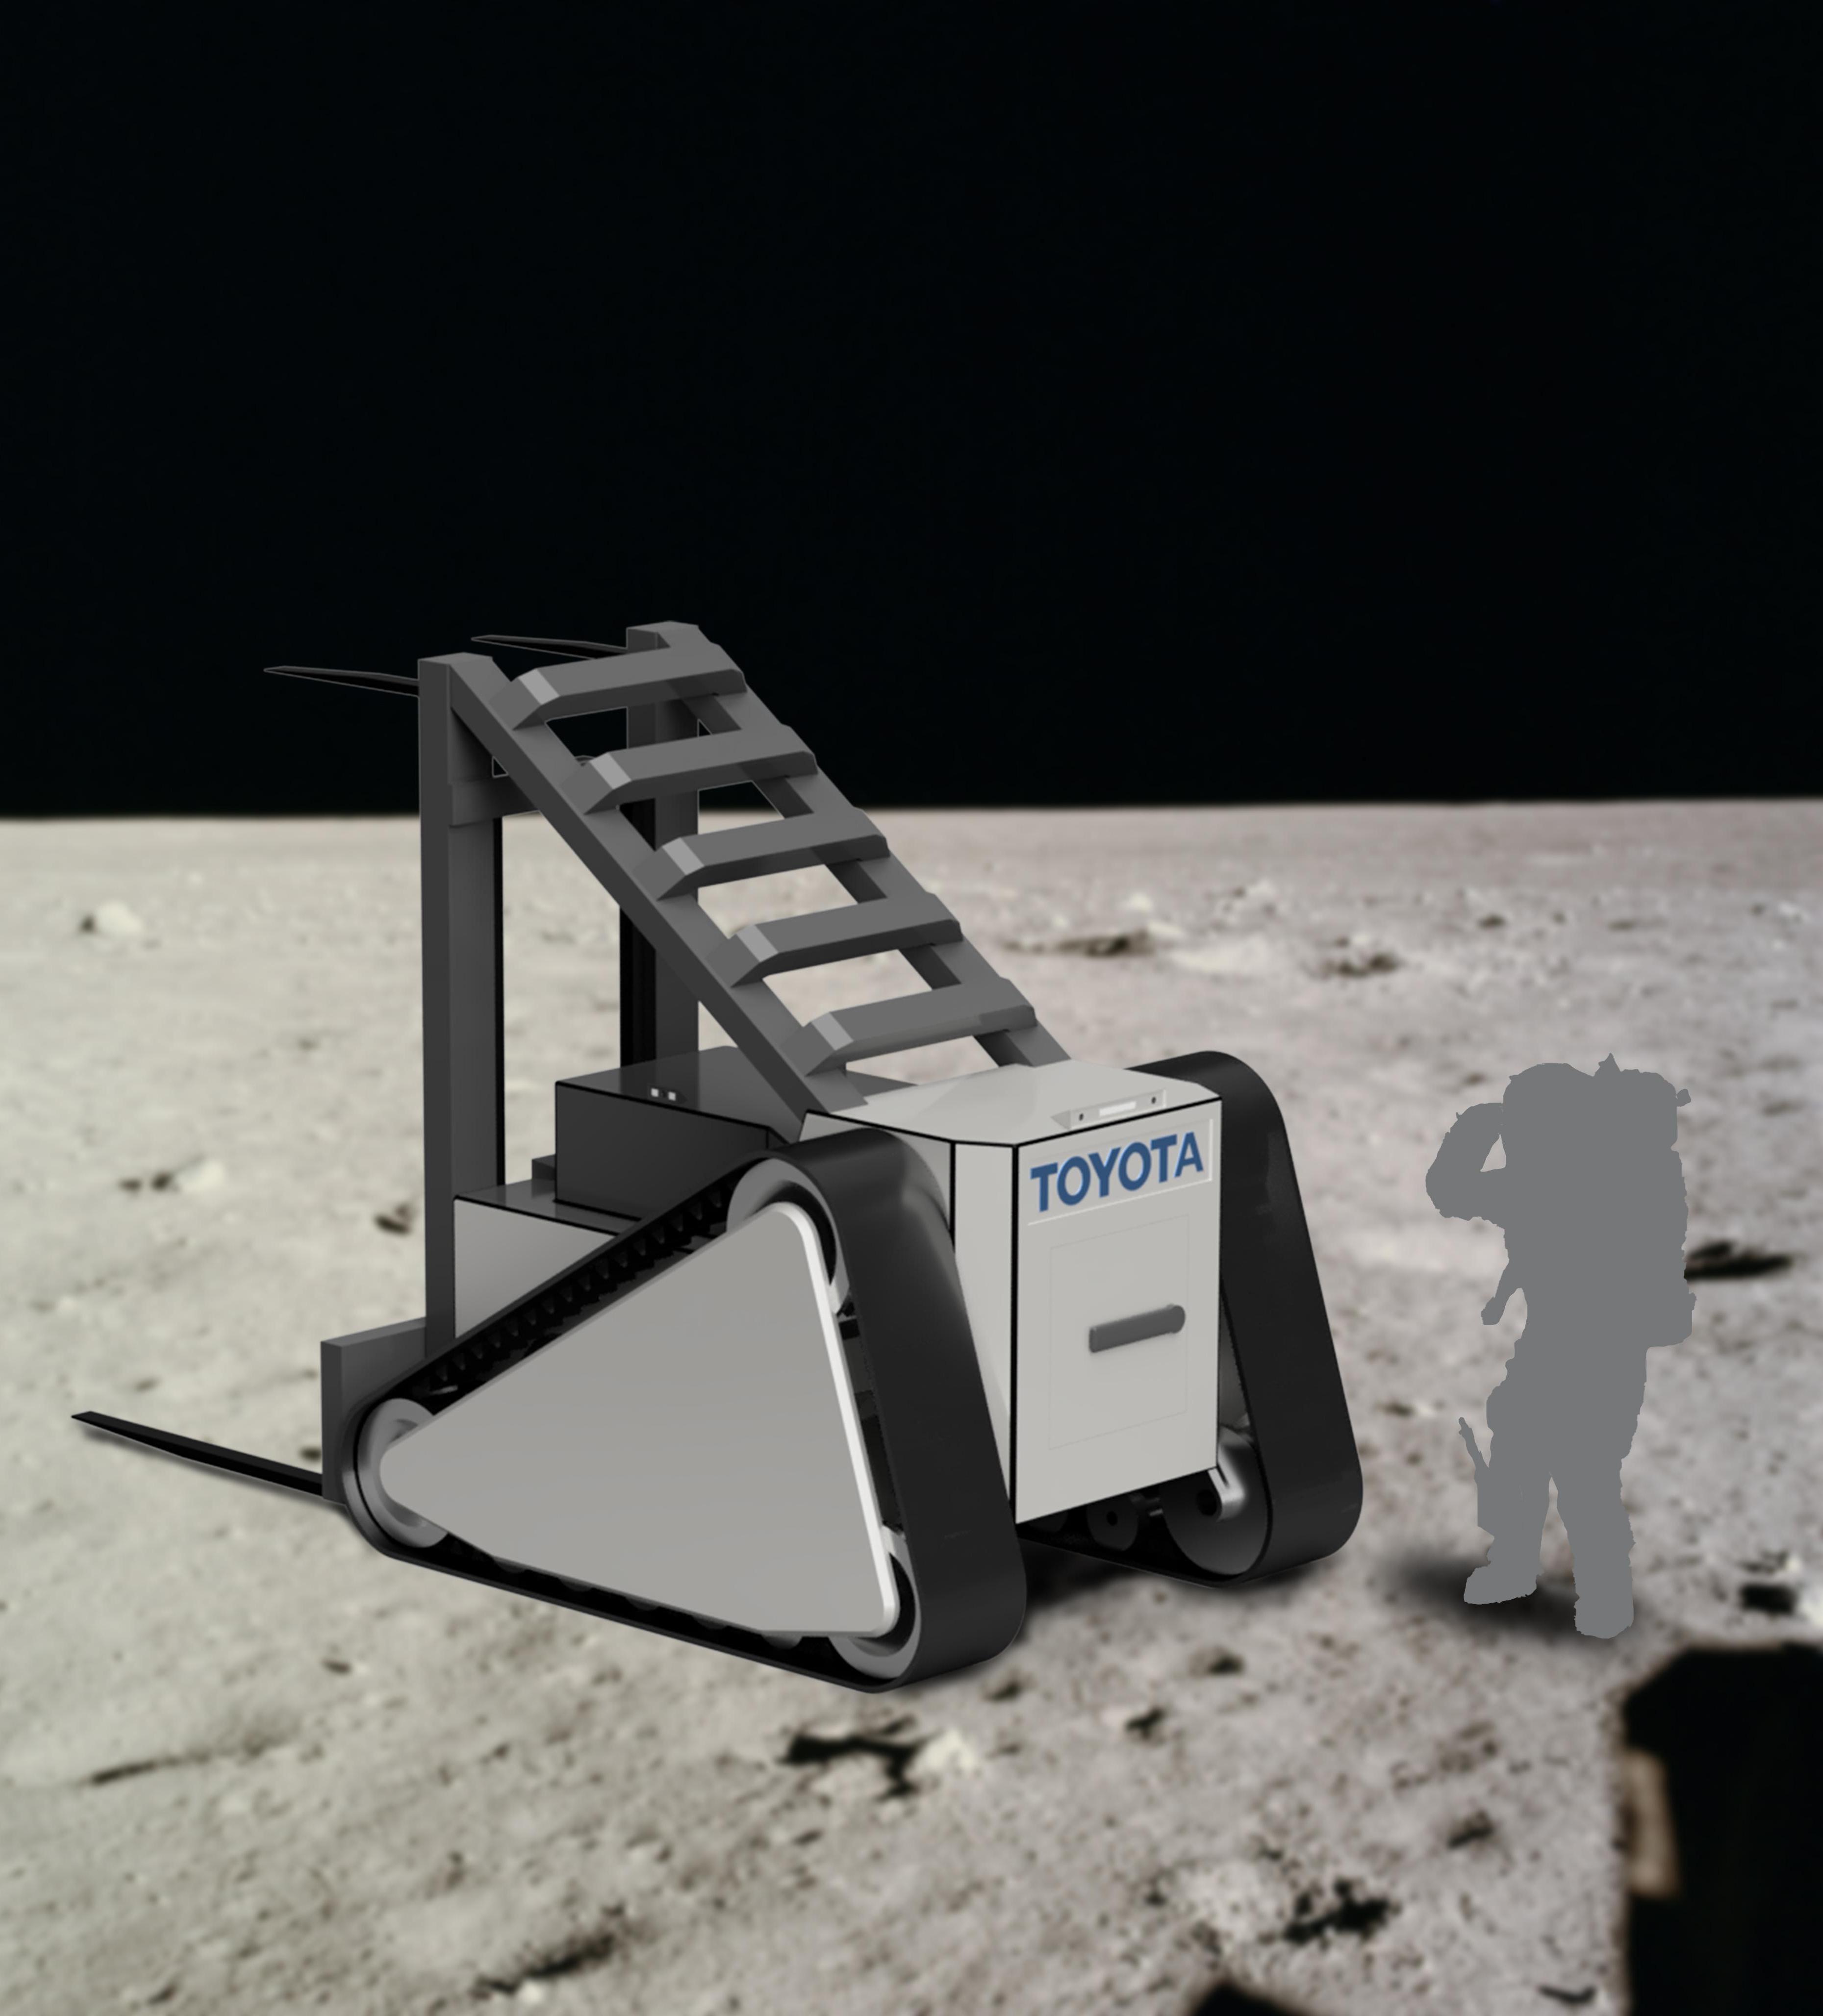 Electric Counterbalance Forklift for Use on the Moon